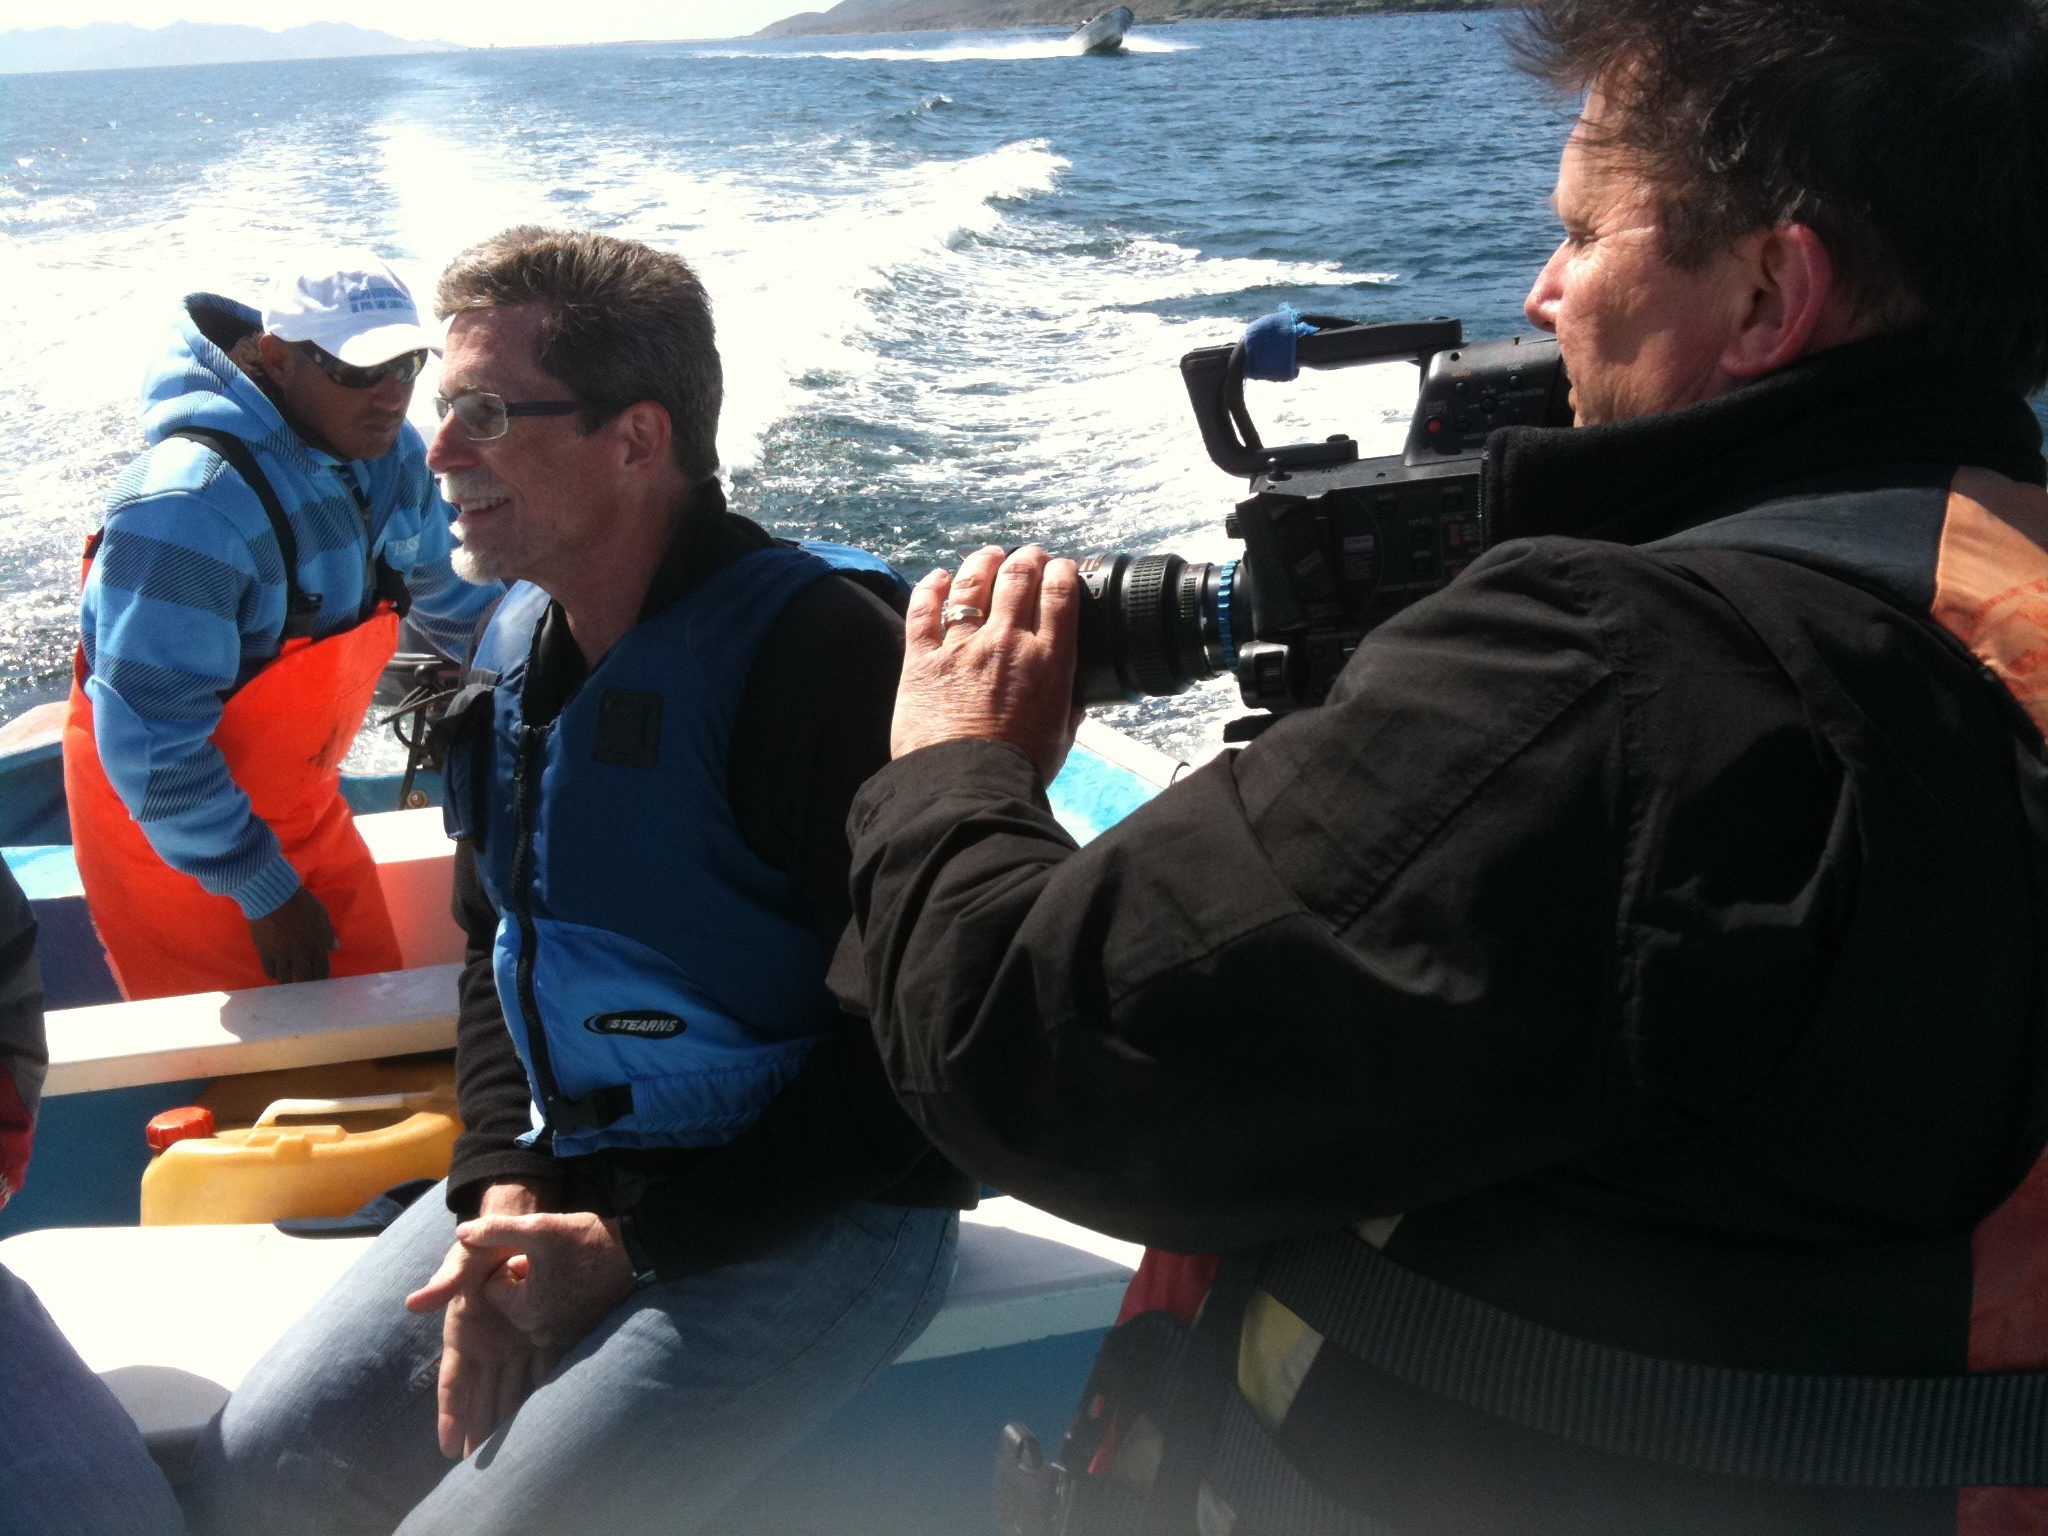 Bob Long with Rick Bayless and AF 100 in the Pacific during an Episode of 